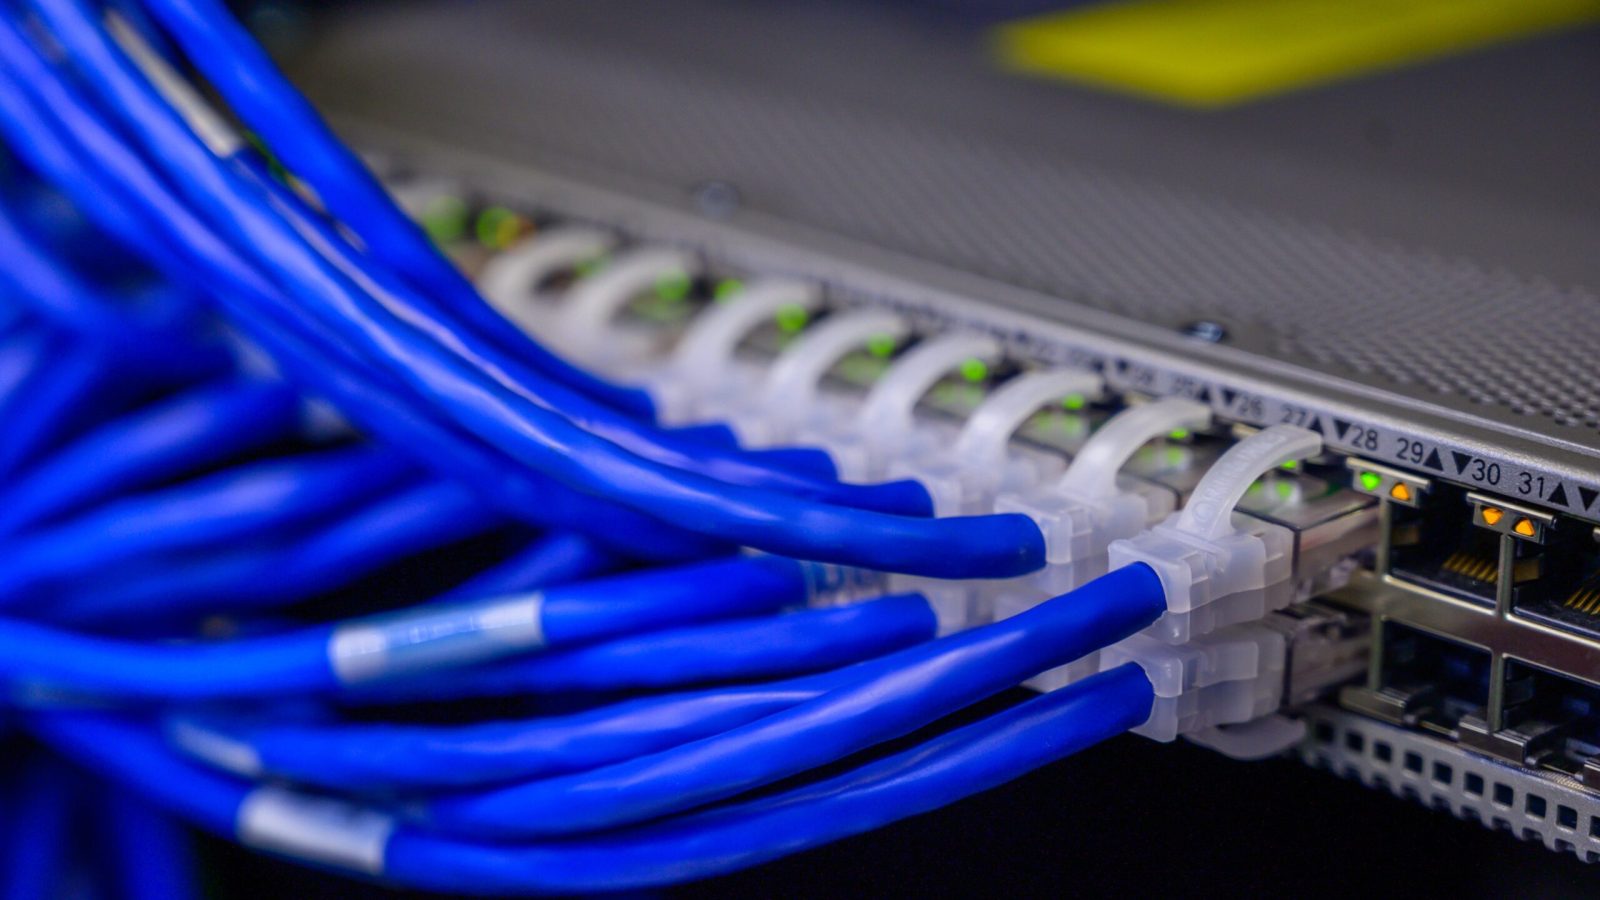 Discover our structured cabling solutions with meticulously organized Ethernet cables seamlessly plugged into routers. Elevate your connectivity experience with Comtek. Serving Des Moines, Ankeny, and all of Iowa.